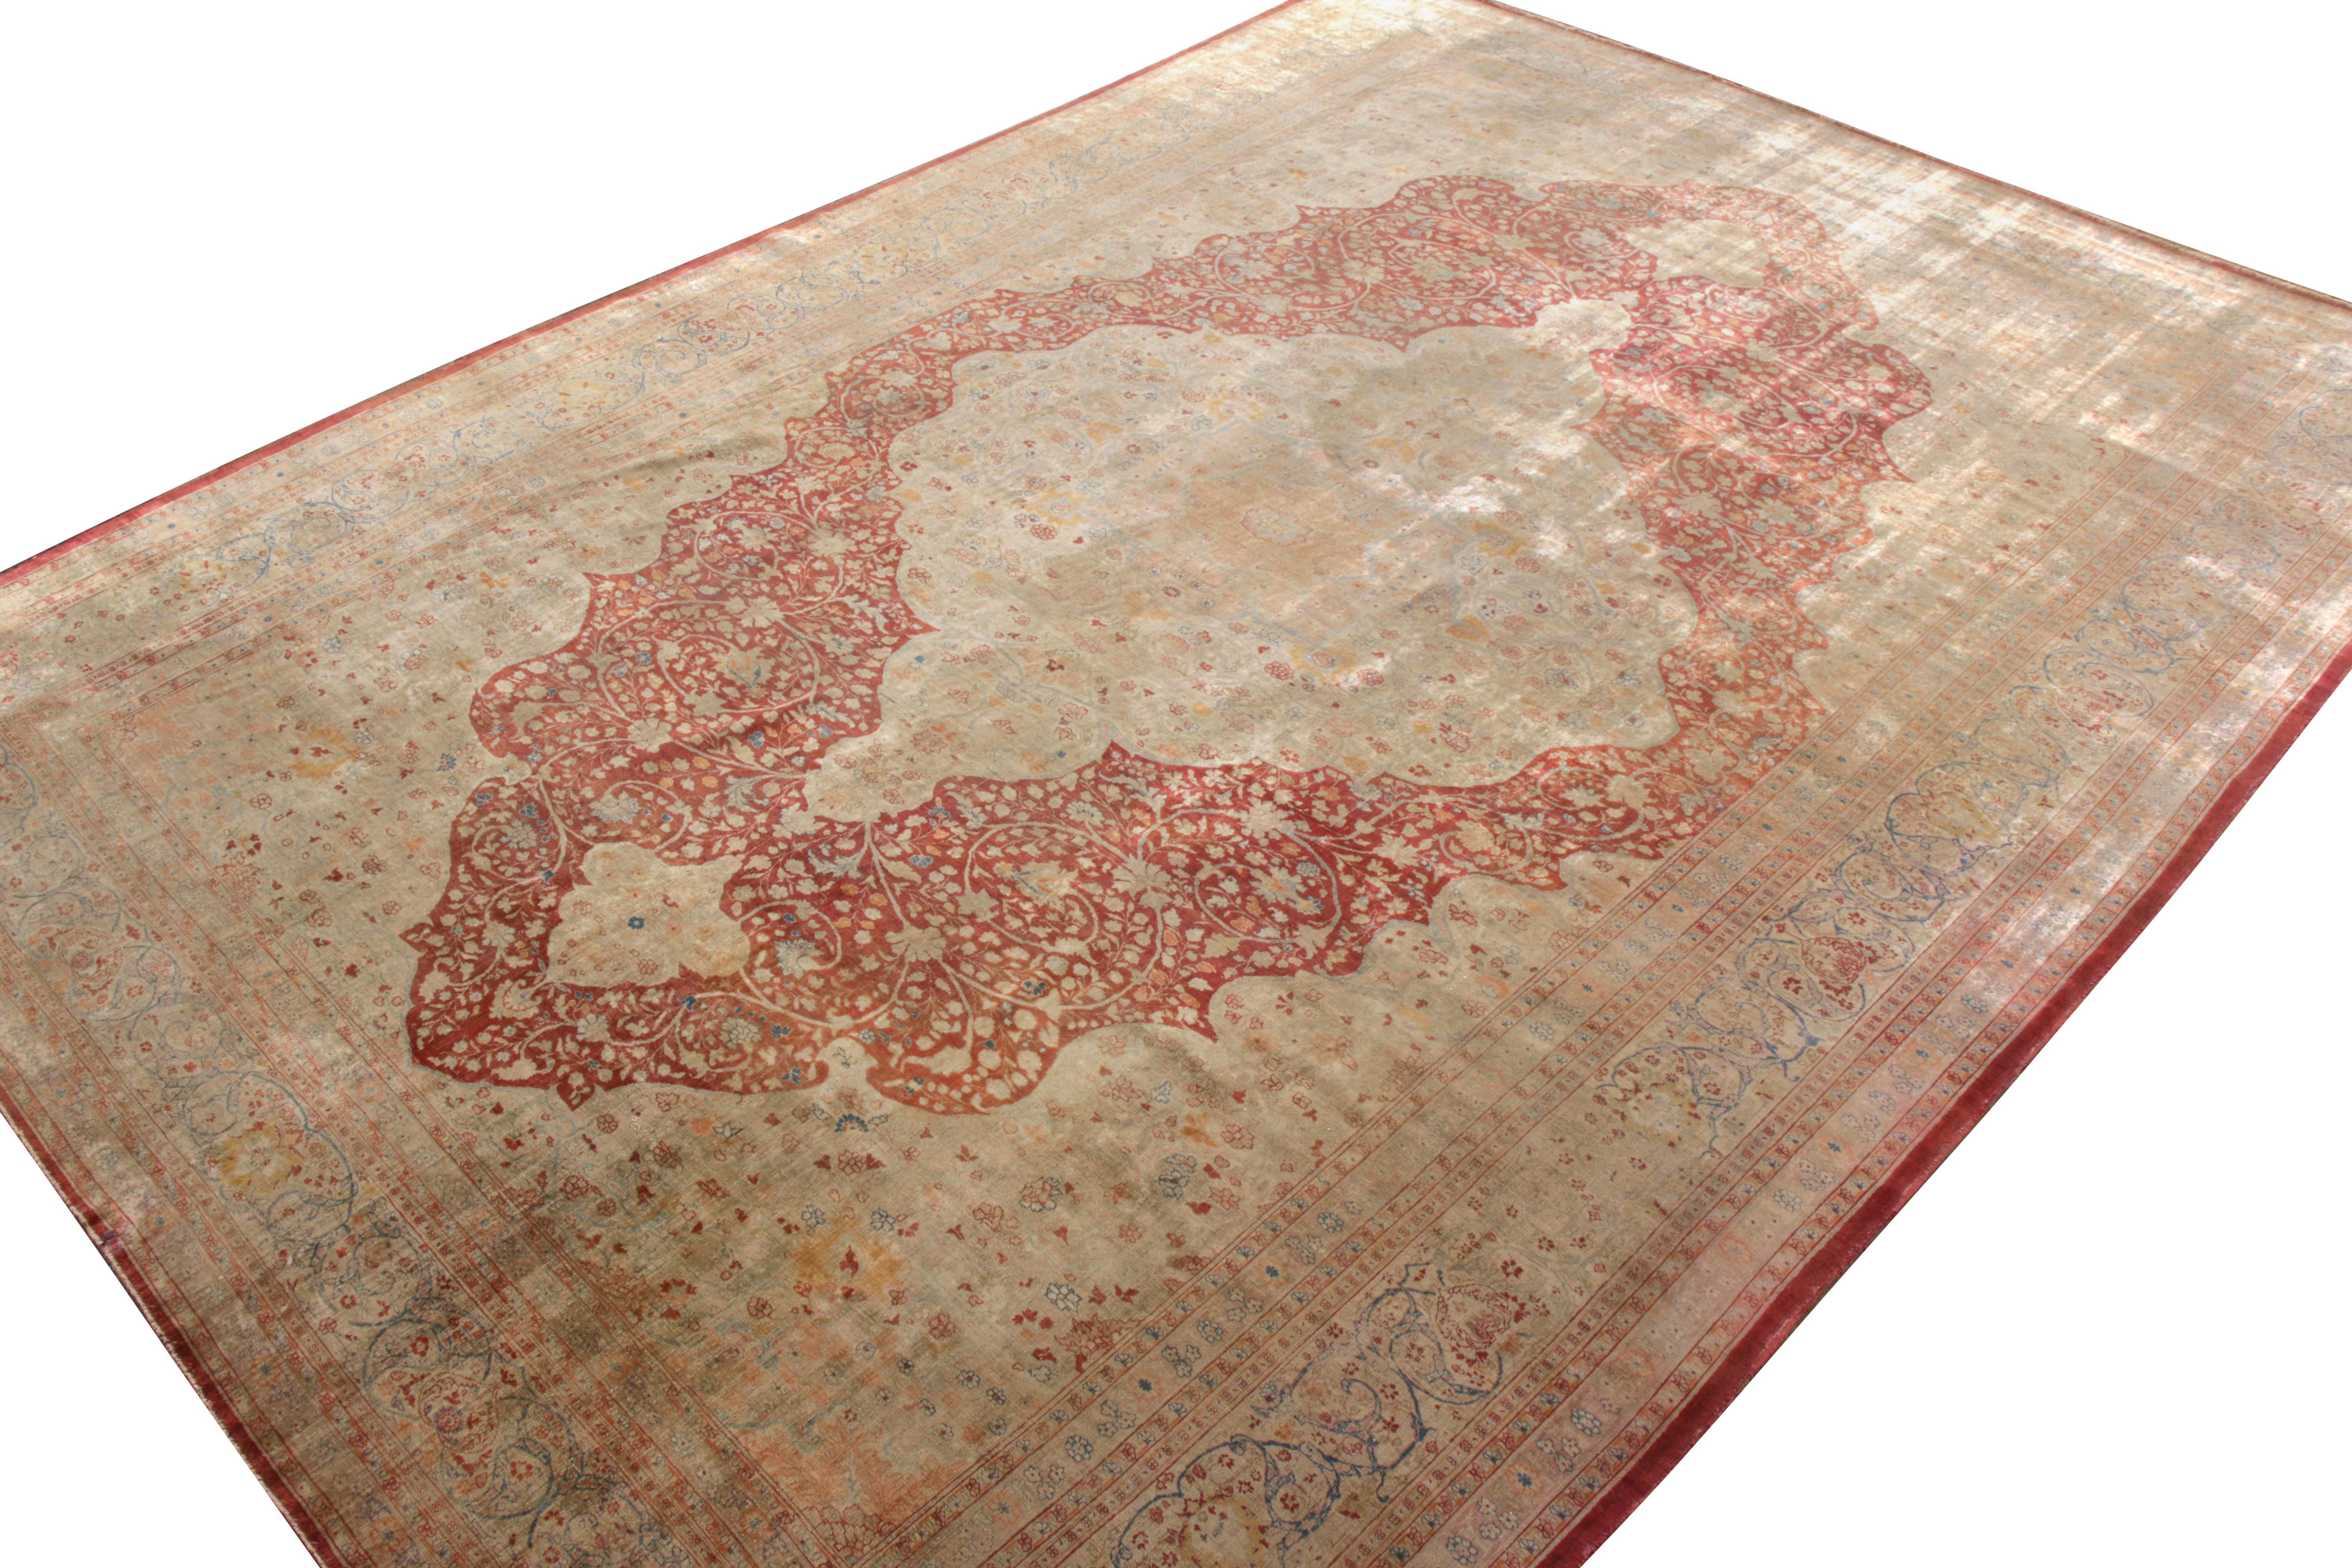 Hand-Knotted Antique Tabriz Persian Rug in Red Medallion Pattern In Good Condition For Sale In Long Island City, NY